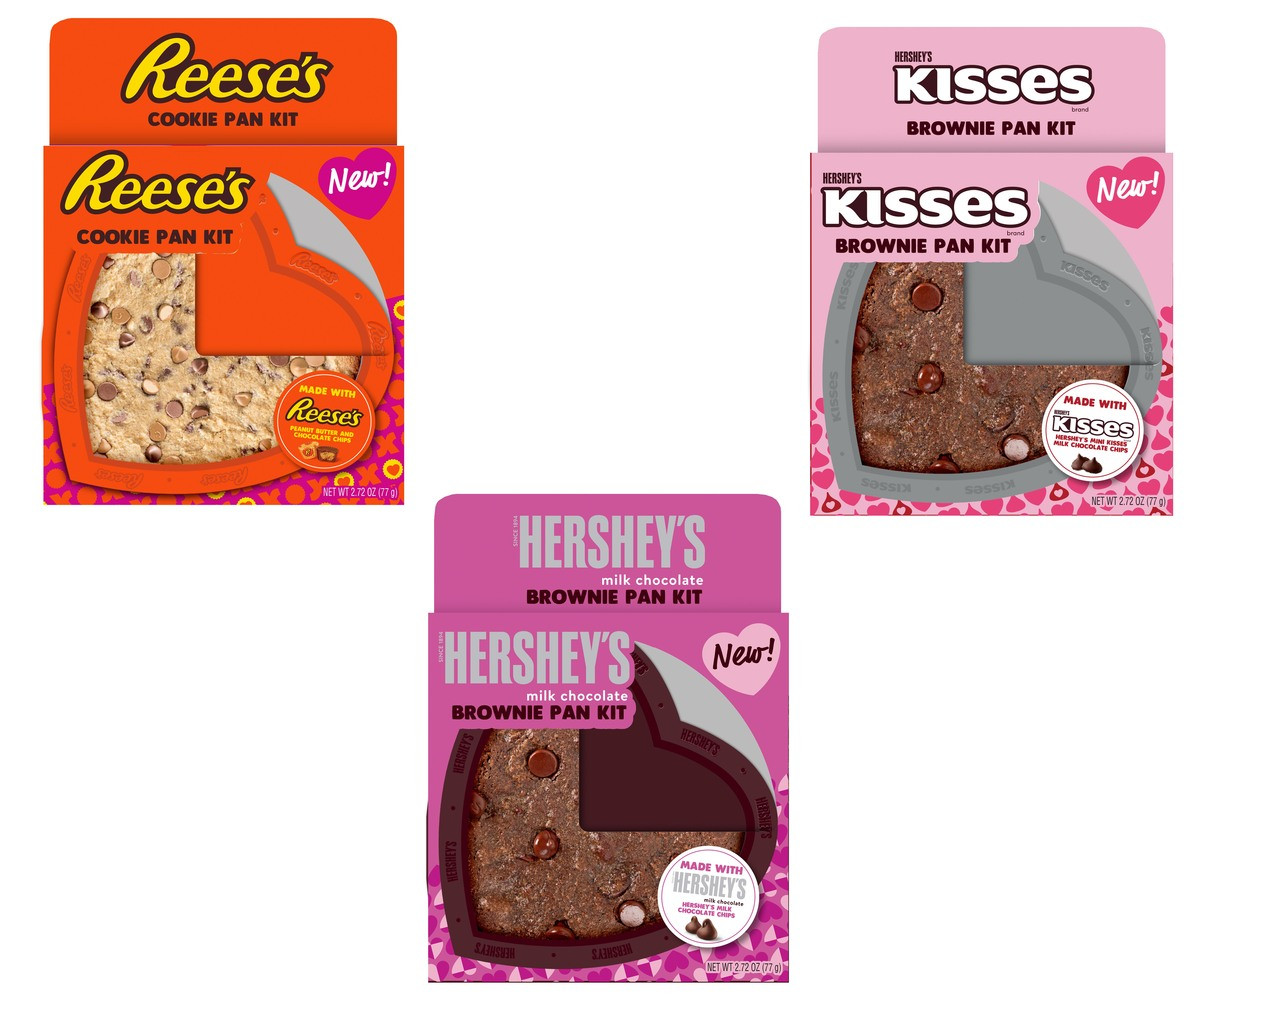 https://cdn11.bigcommerce.com/s-s400f38mcs/images/stencil/1280x1280/products/1261/5323/240606191_HERSHEY_REESES_5INCH_HEART_PAN_GROUP_FRONT__26449.1700146658.jpg?c=1